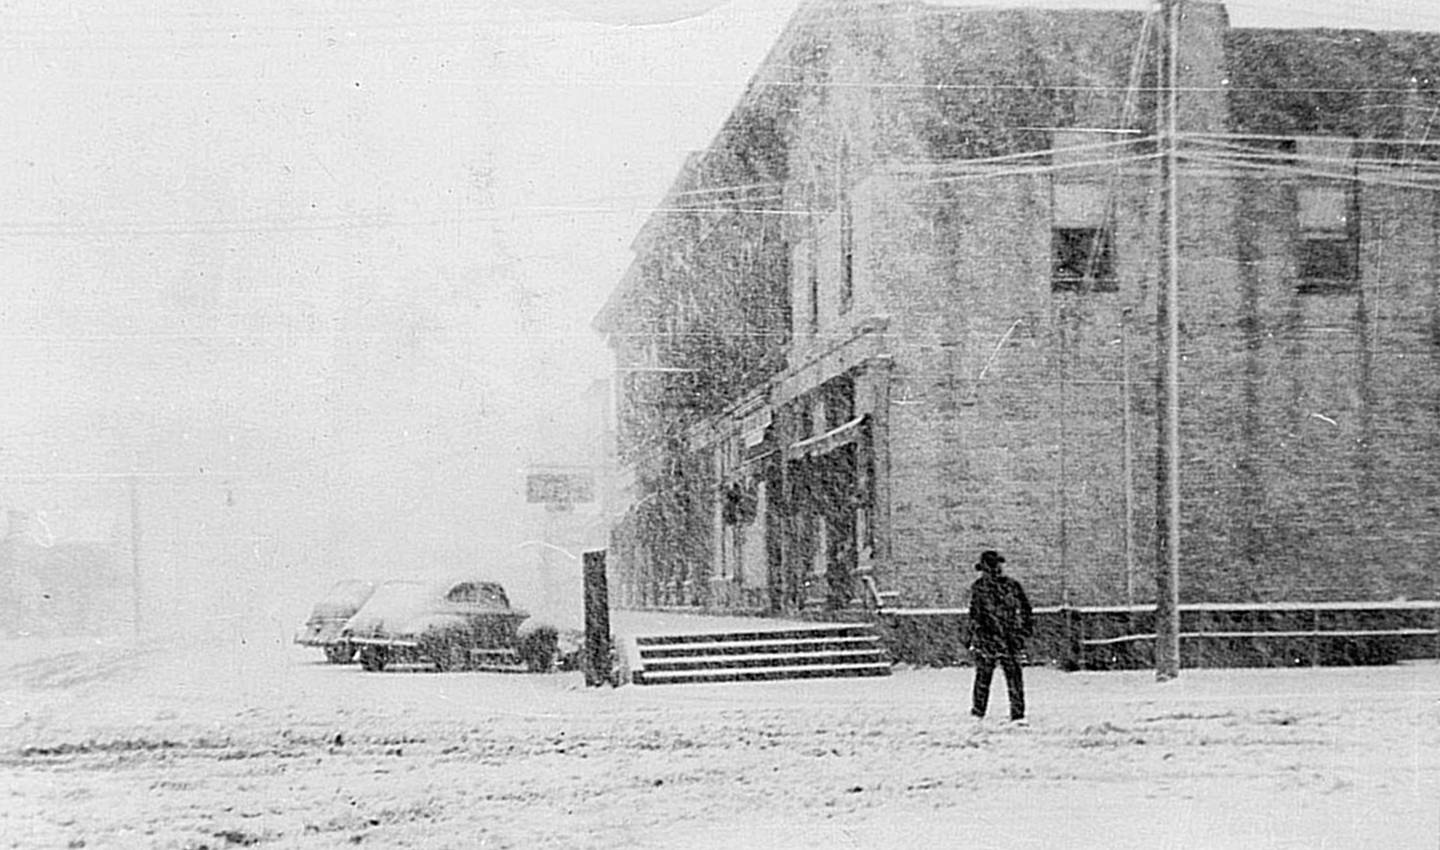 A snowy day in 1943 at the intersection of Main and Washington Street in downtown Oswego. (Photo provided by the Little White School Museum)